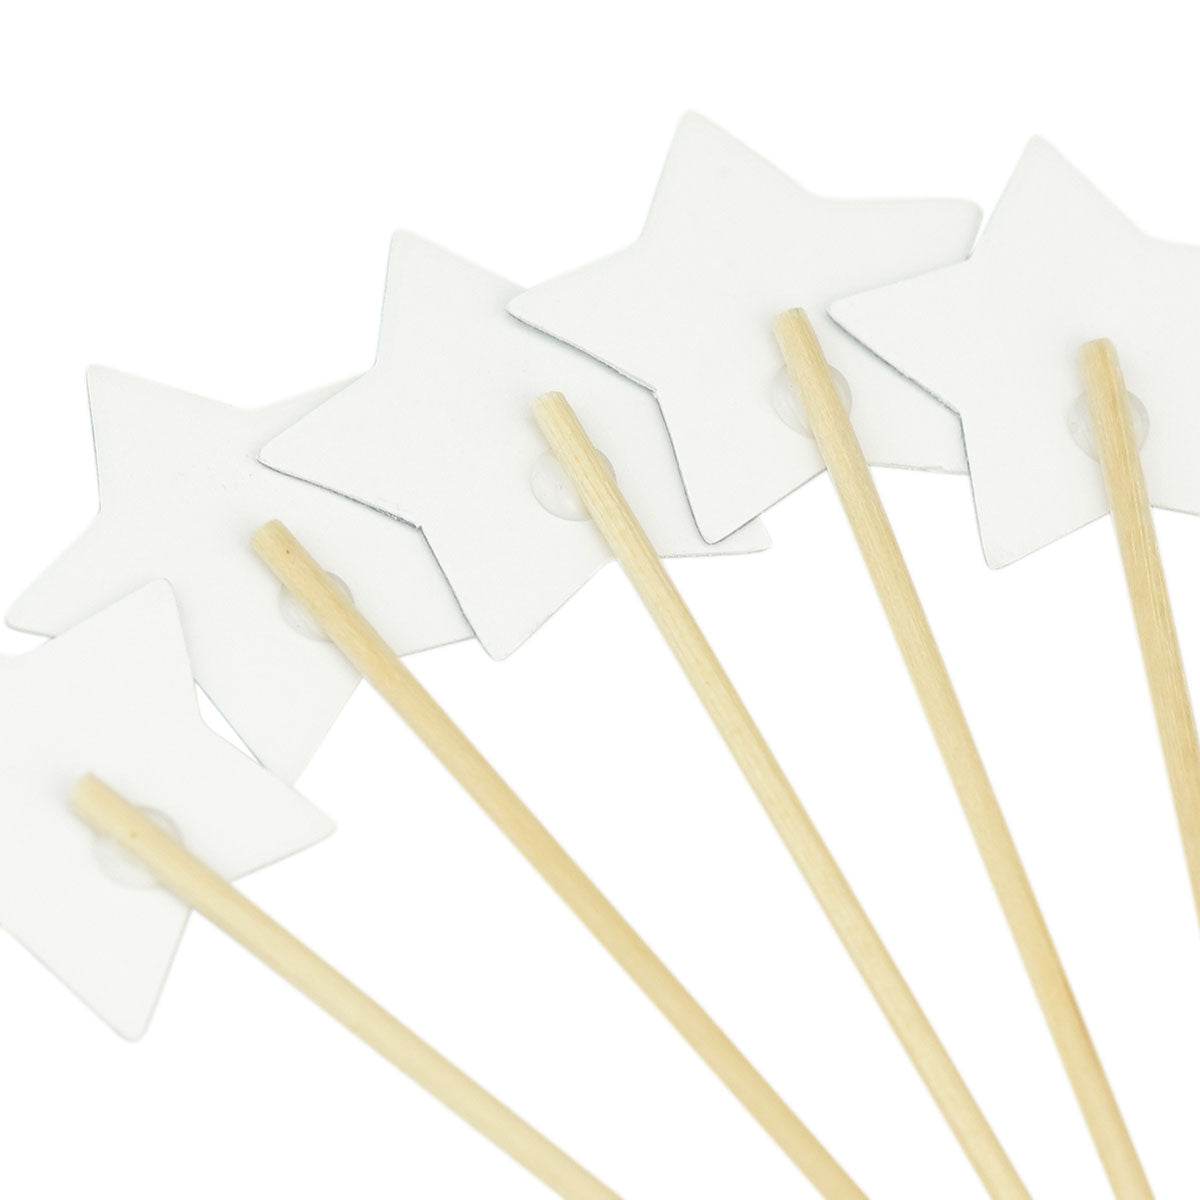 50 PCS Cake Toppers Sticks Toothpicks Decorations for Birthday Party Wedding Baby Shower Desserts Muffins Appetizers